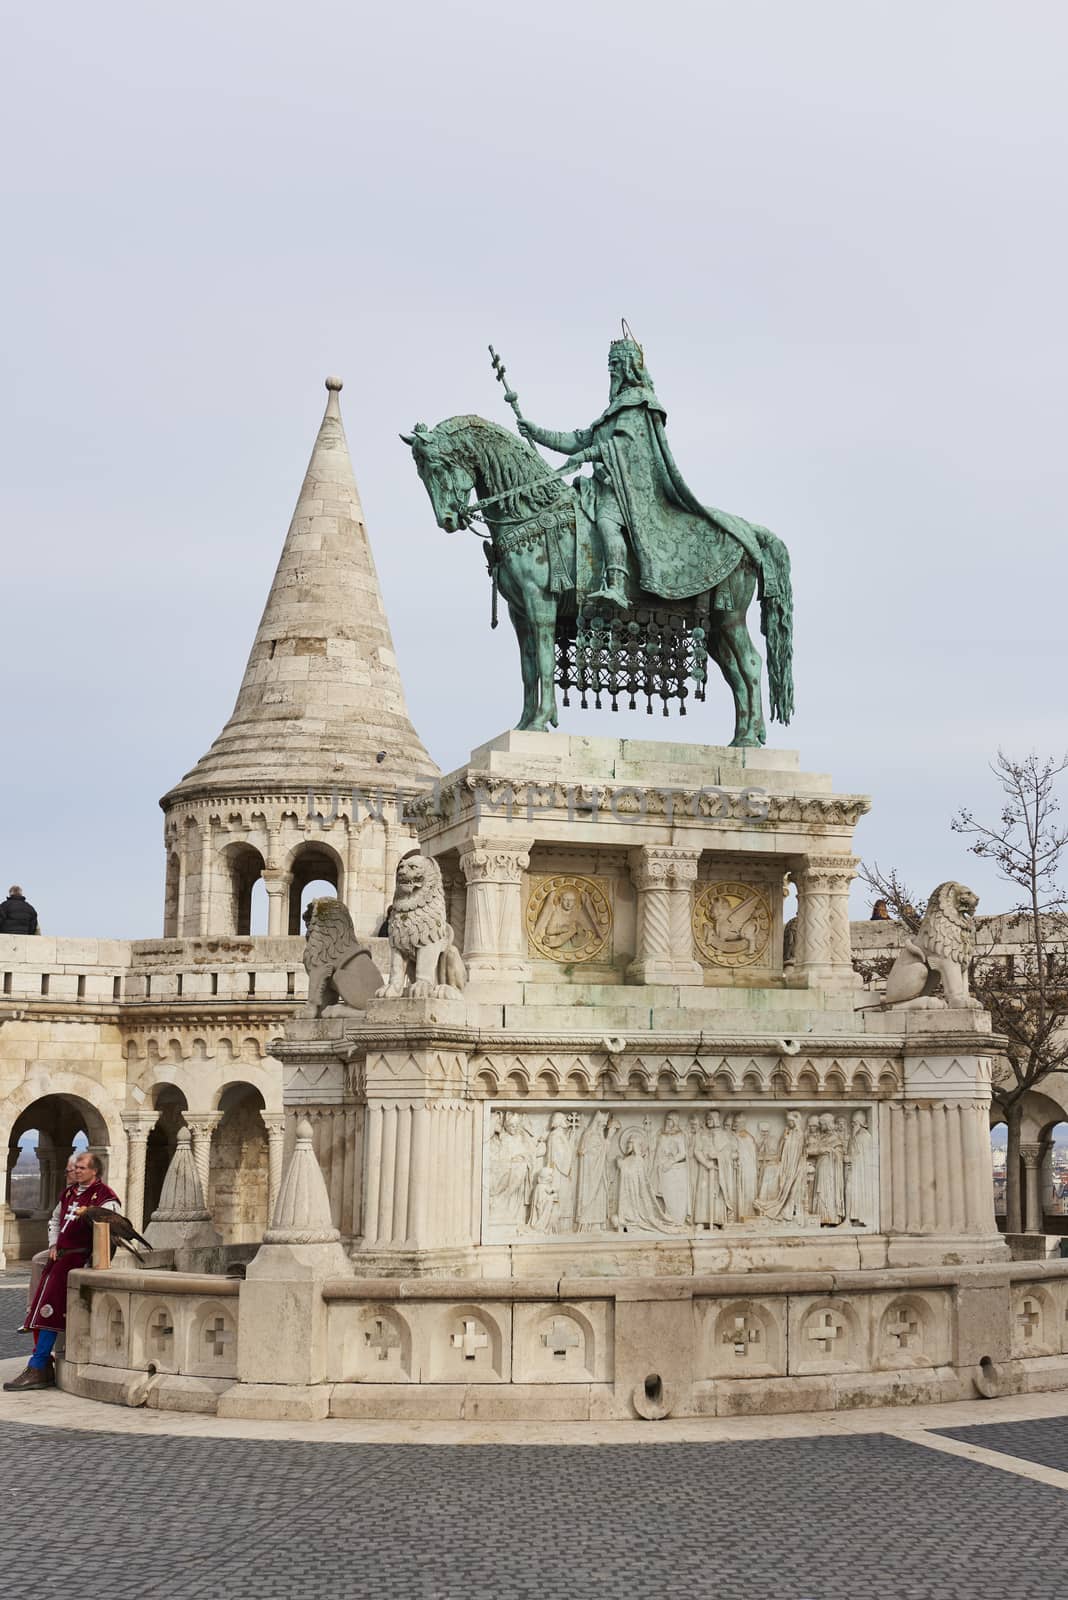 BUDAPEST, HUNGARY - FEBRUARY 02: Bronze statue of Saint Stephen, in the Old Town district, with Fisherman's Bastion spire in the background. February 02, 2016 in Budapest.